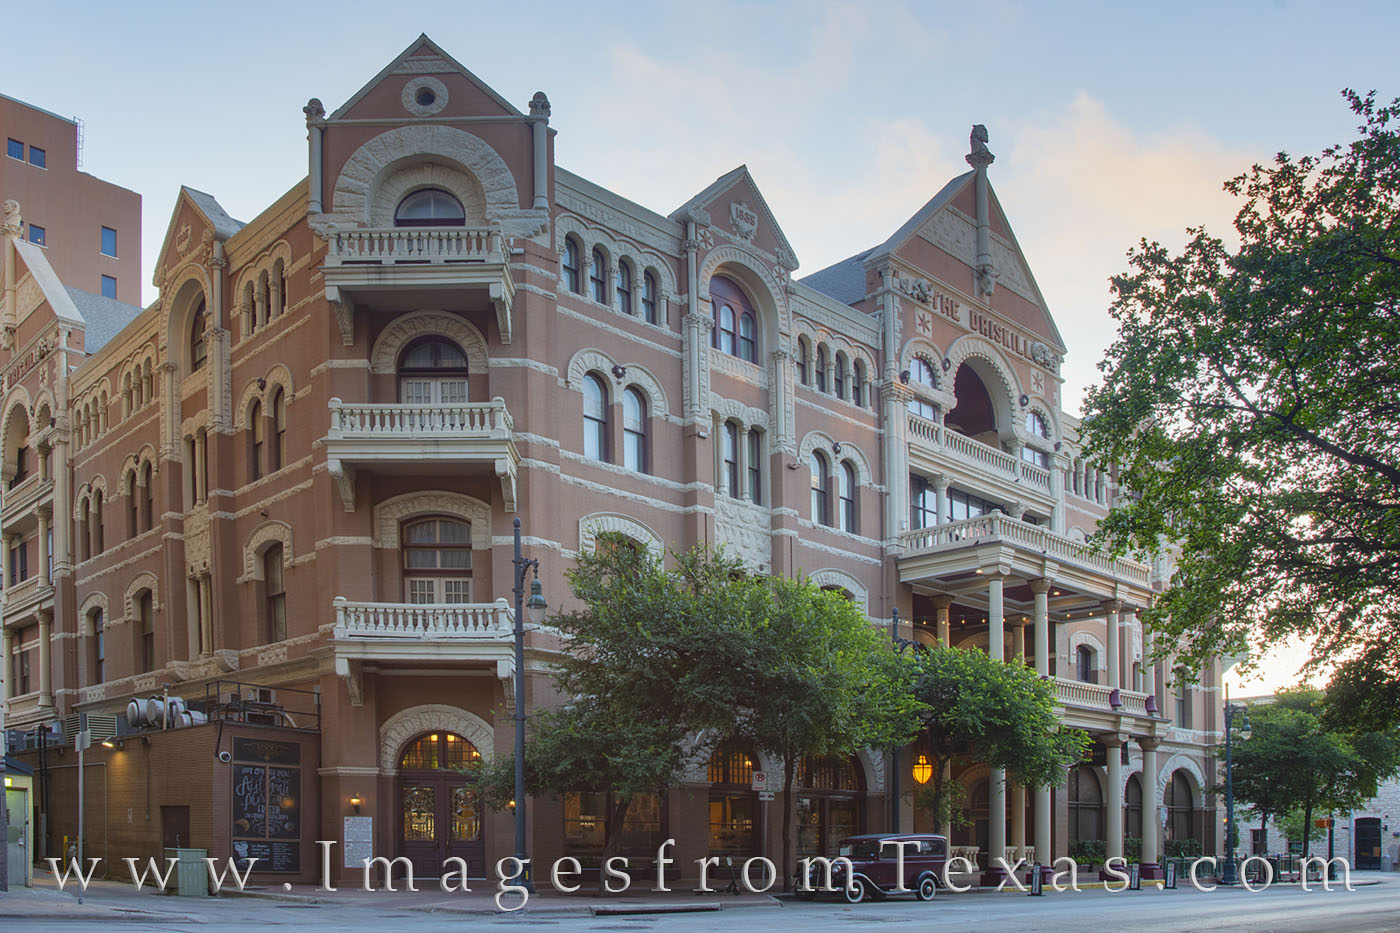 The Driskill Hotel is located in downtown Austin and offers a first class hotel stay. Built in the late 1800s, the architecture...